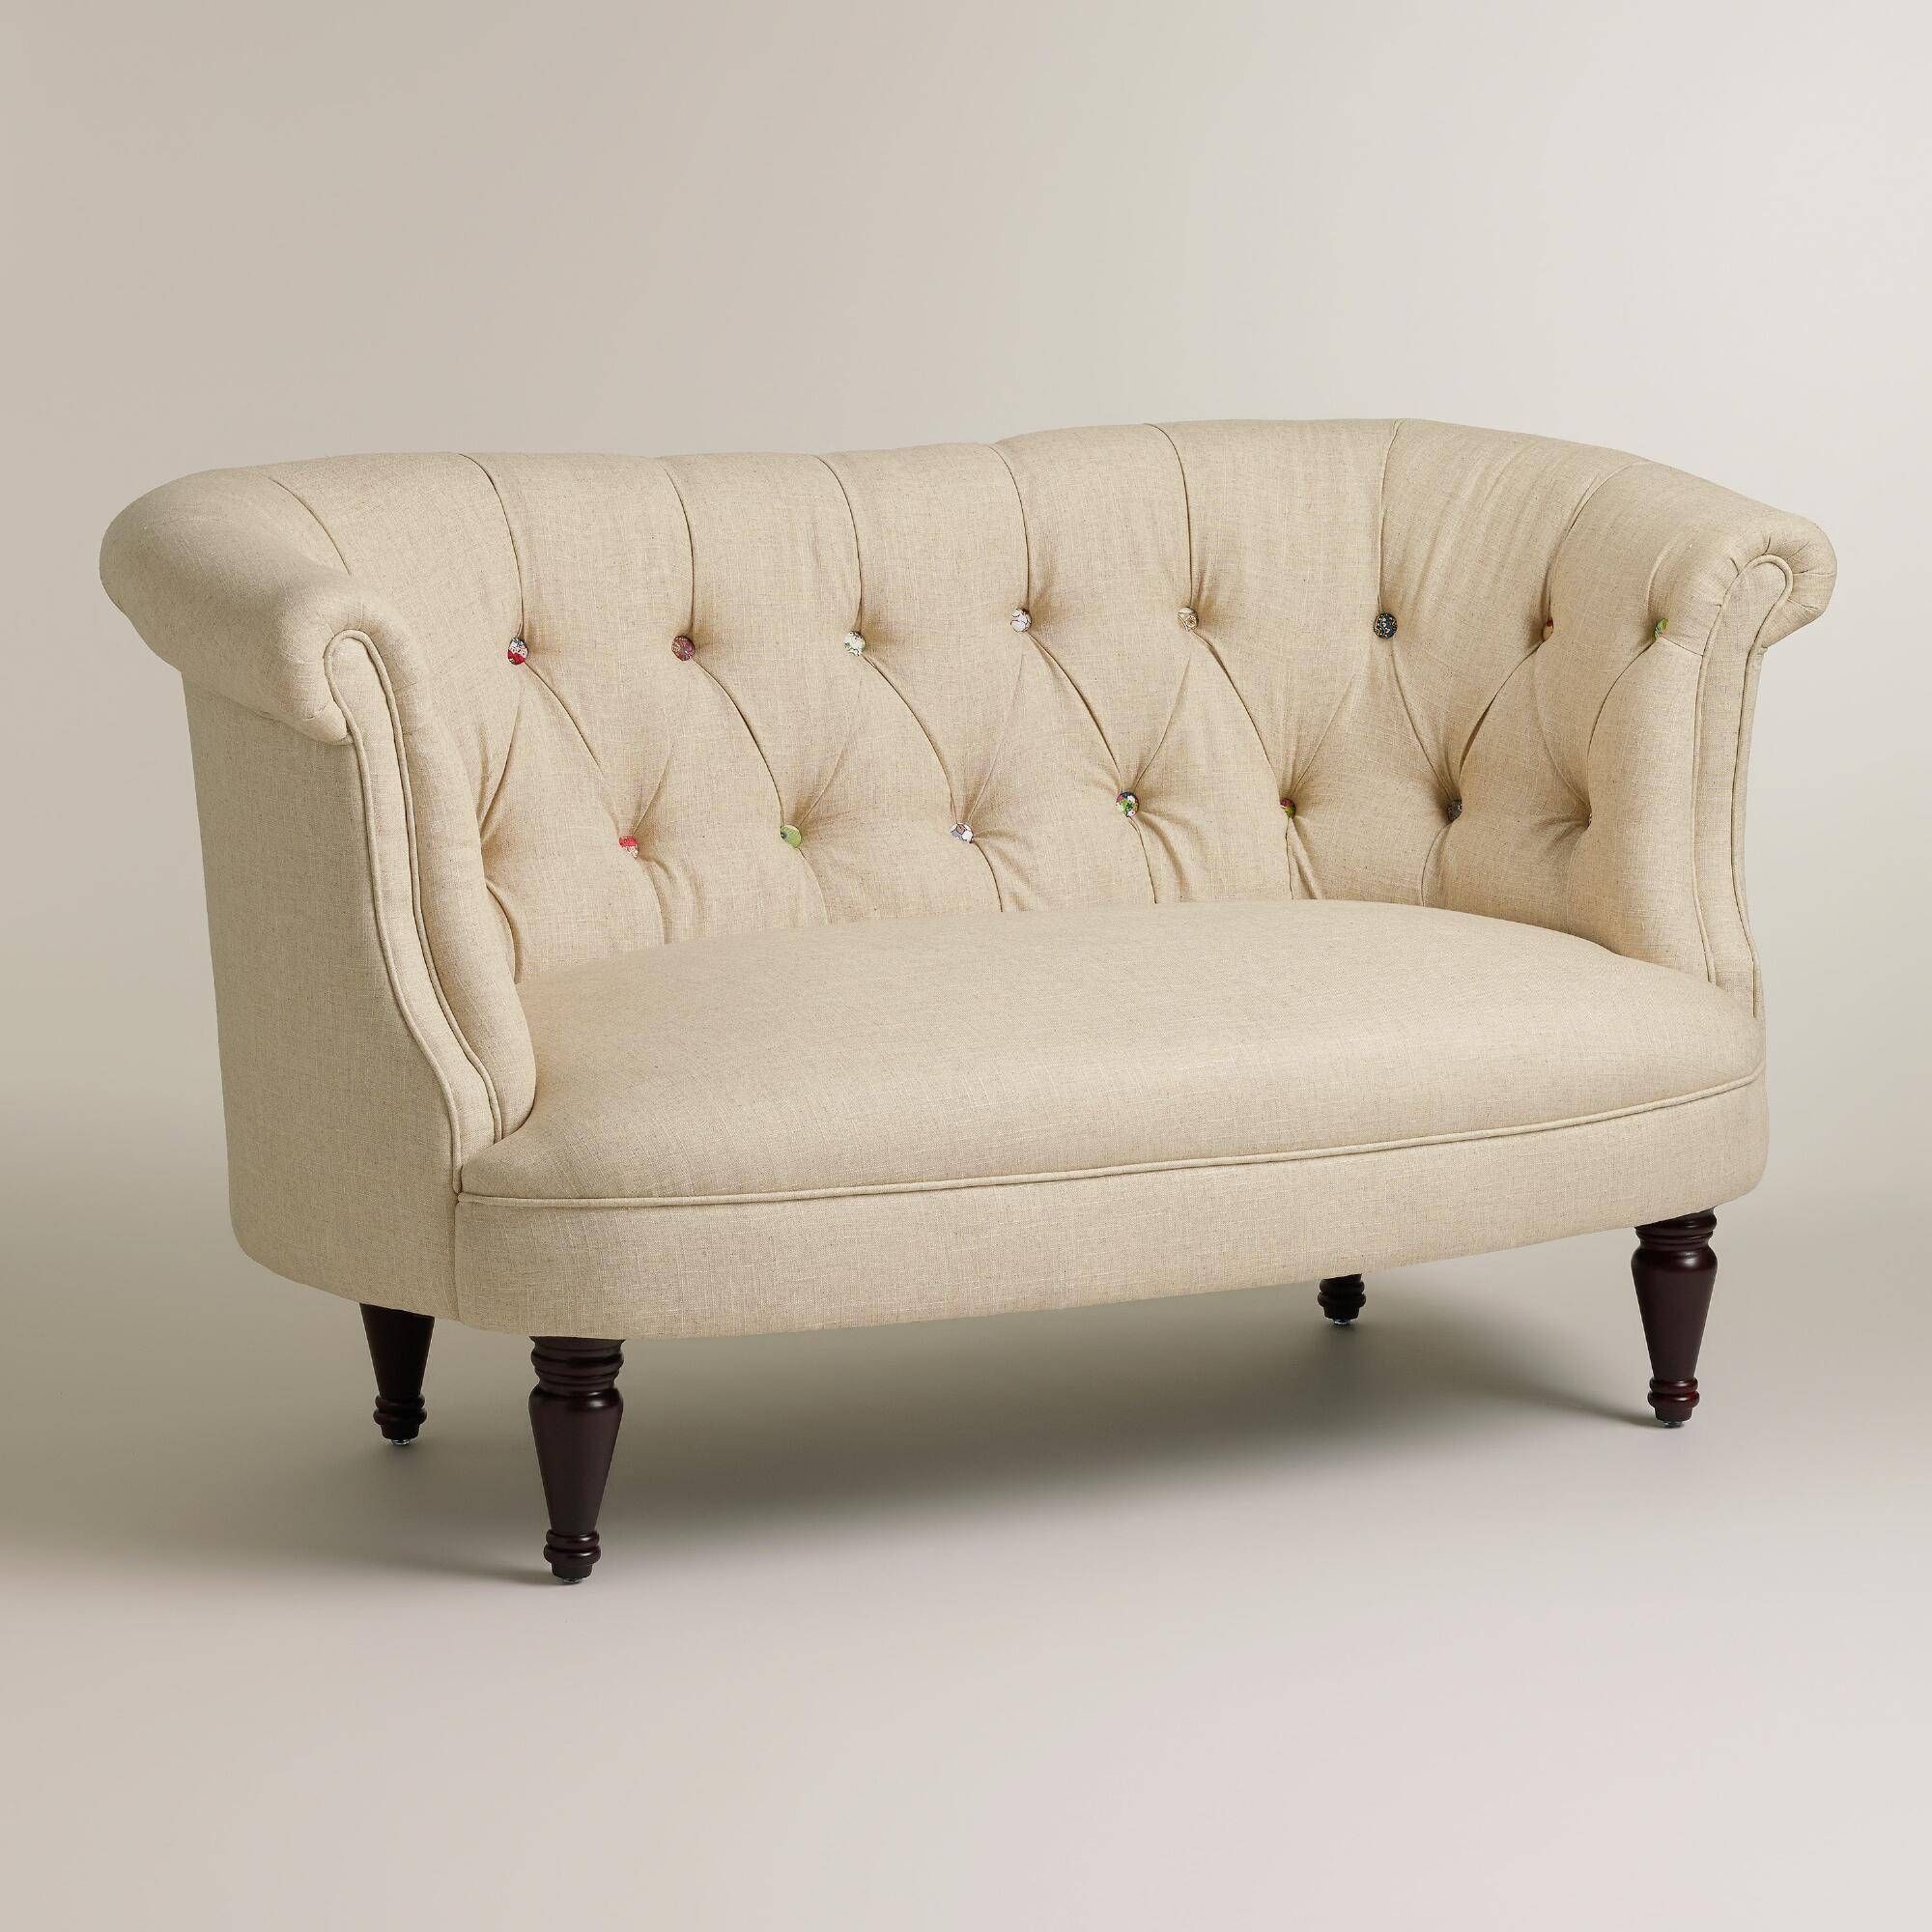 Sofa: Cool Couches For Provides A Warm To Comfortable Feel And Low With Regard To Affordable Tufted Sofa (View 14 of 30)